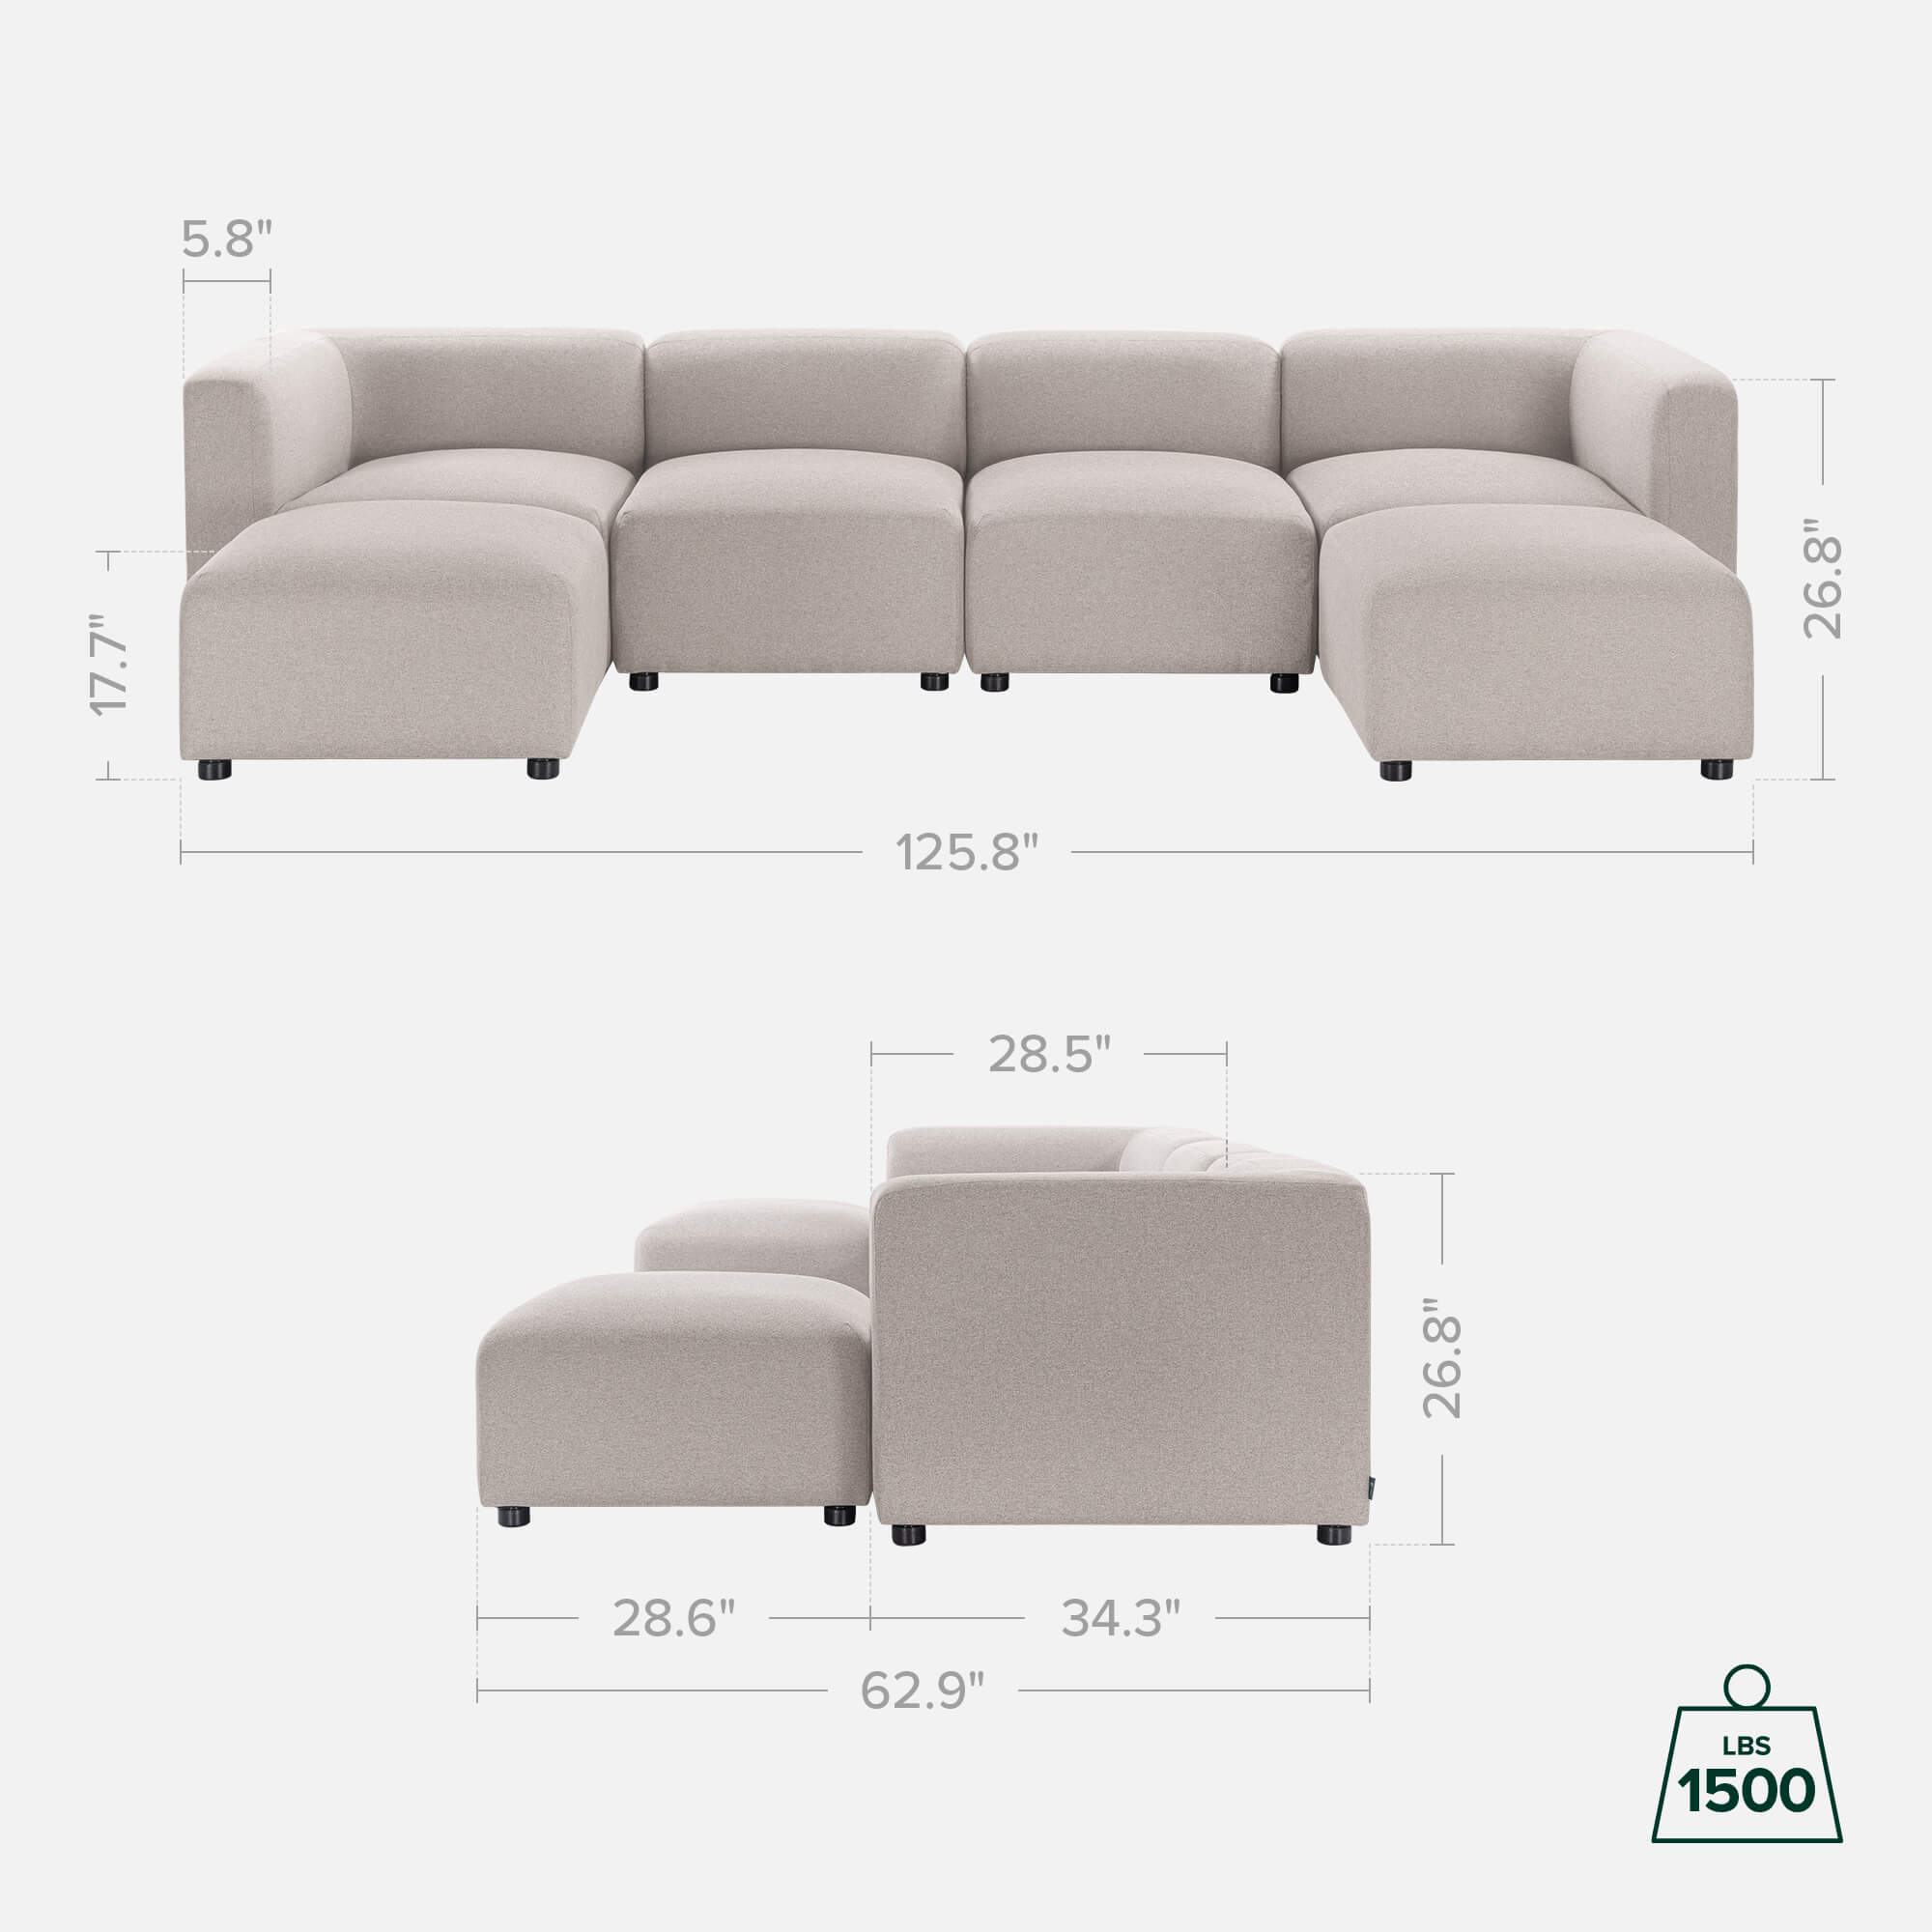 Schematic representation of the Luca Double Chaise Sectional Sofa's measurements